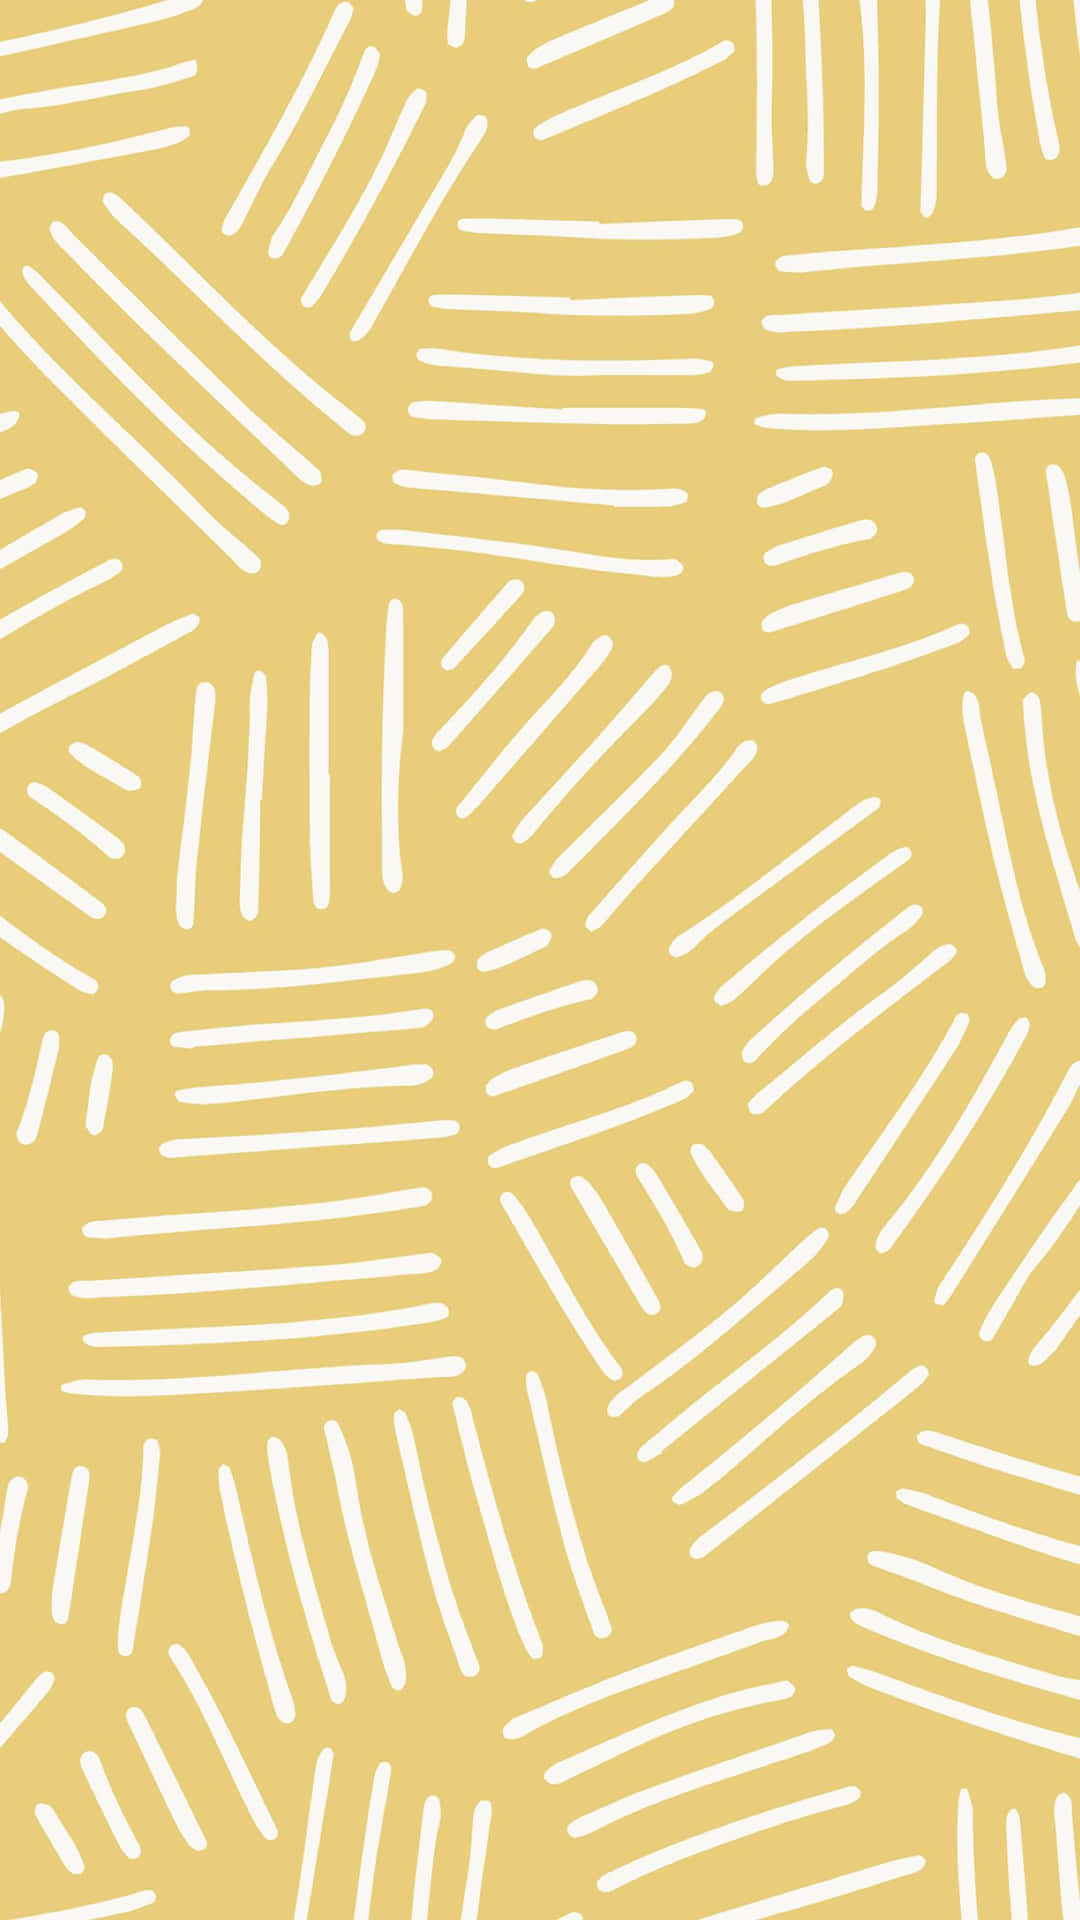 A Yellow And White Pattern With Lines